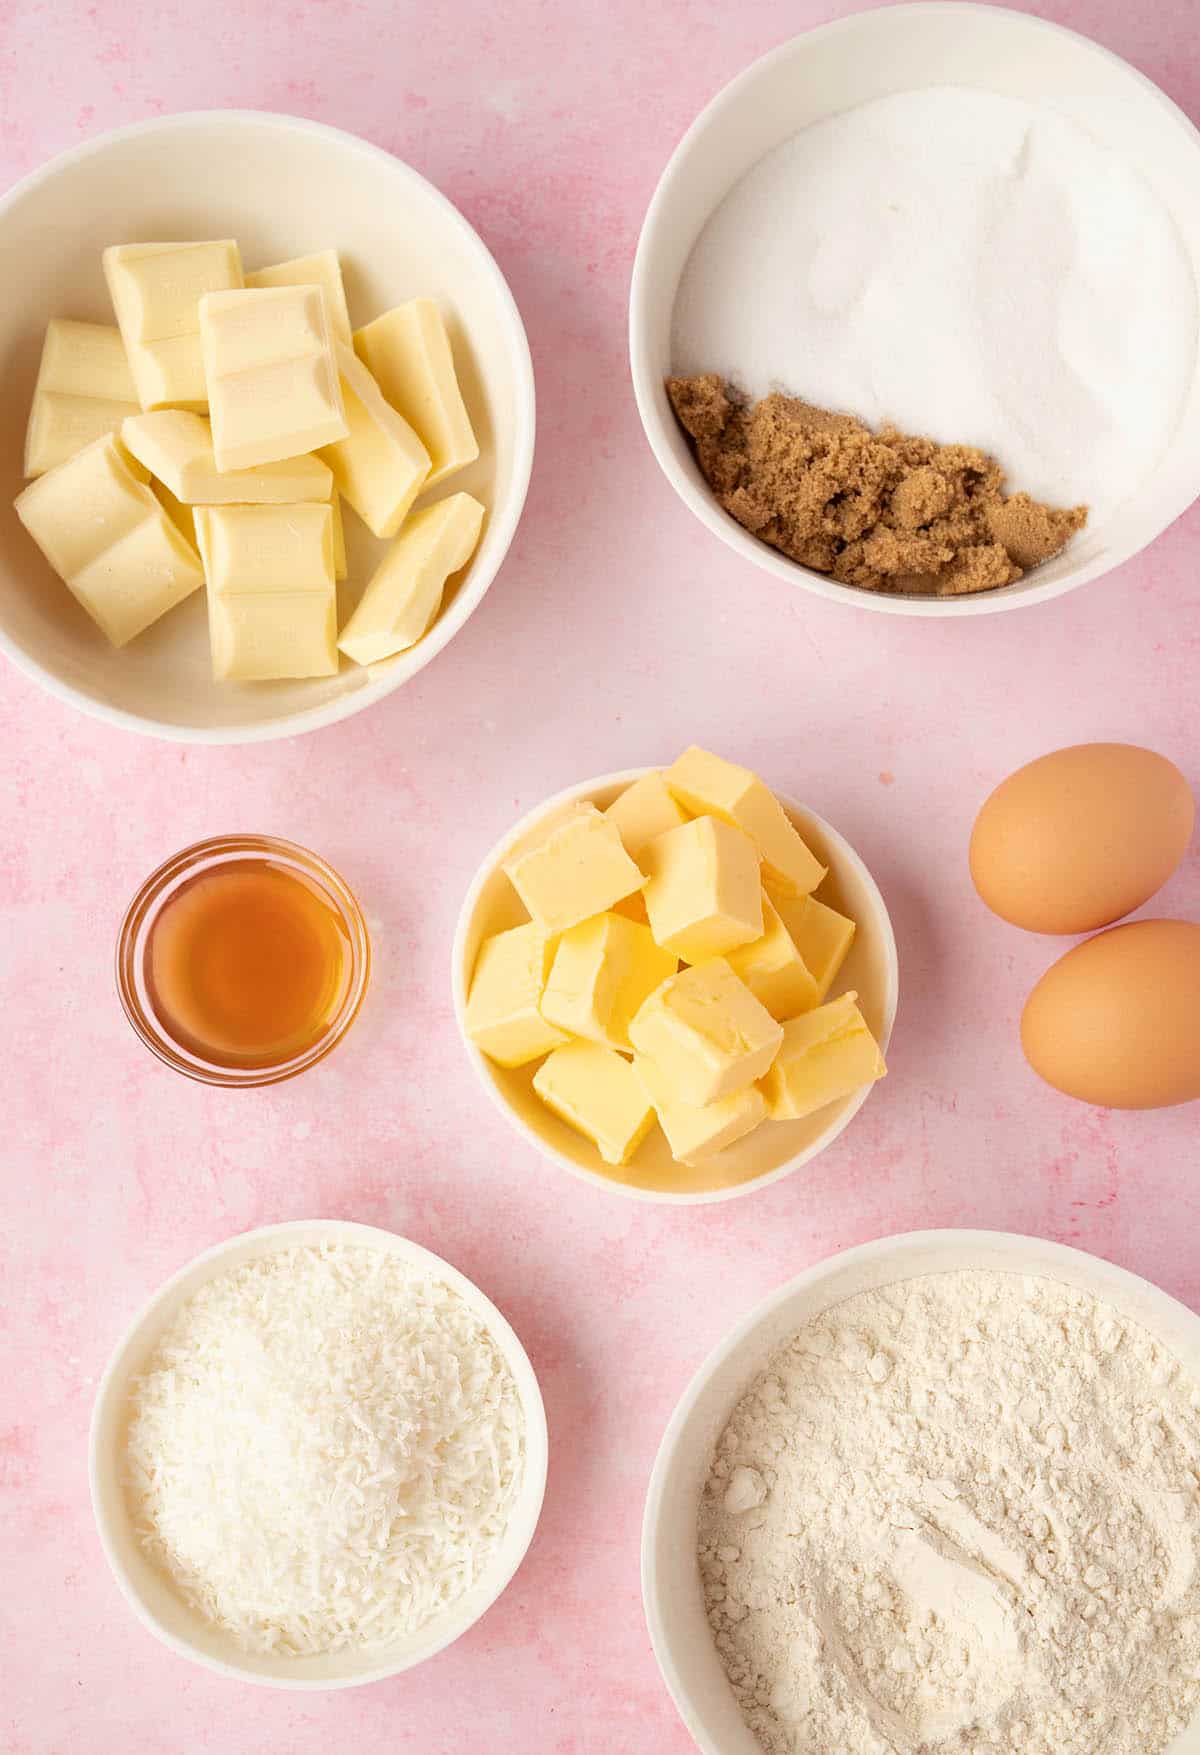 All the ingredients needed to make White Chocolate Coconut Brownies on a pink background.